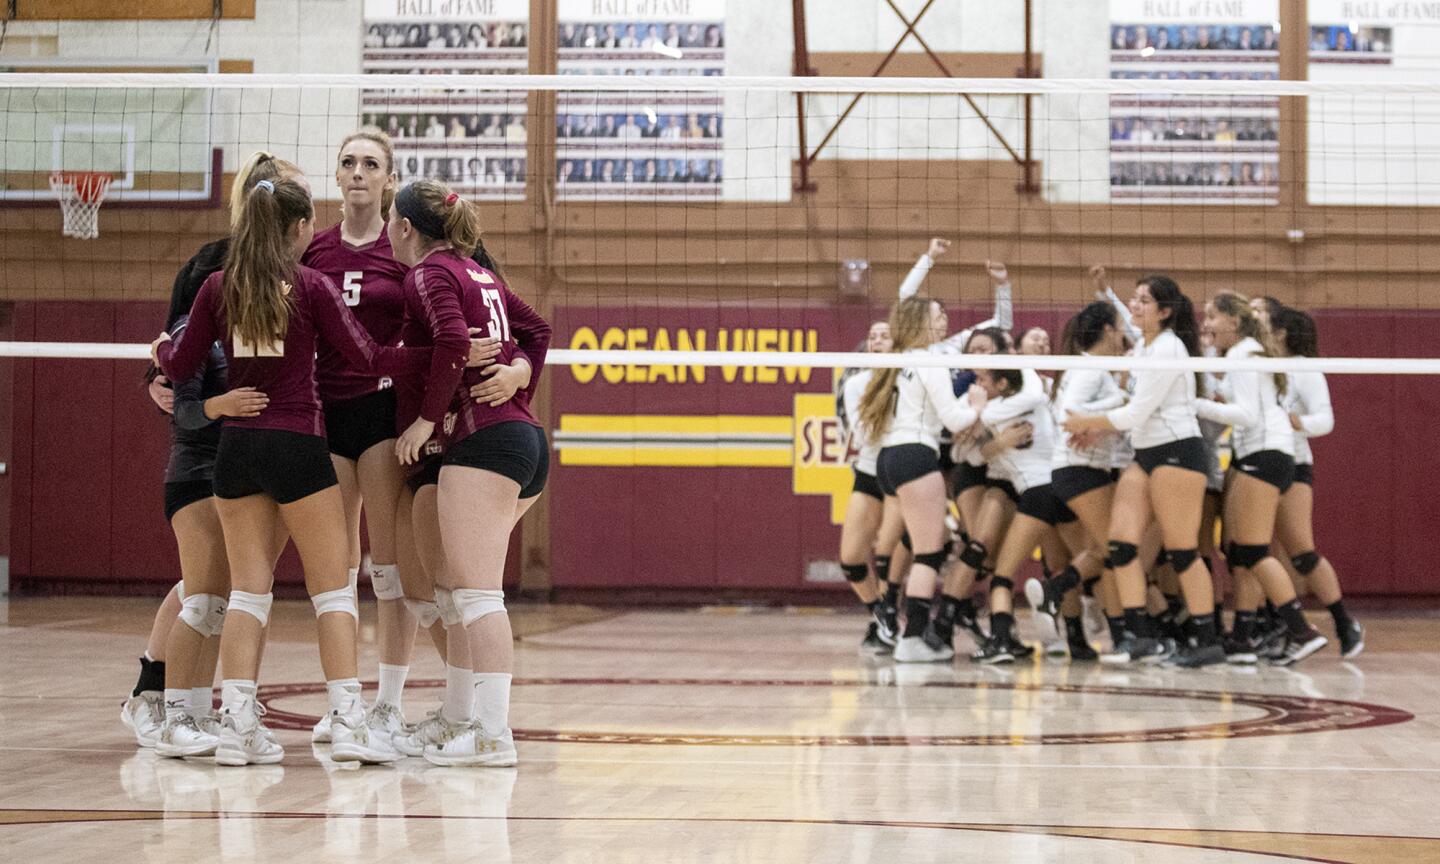 Chatsworth celebrates a tie breaker win over Ocean View during a first round CIF State Southern California Regional Division IV match on Tuesday, November 6.